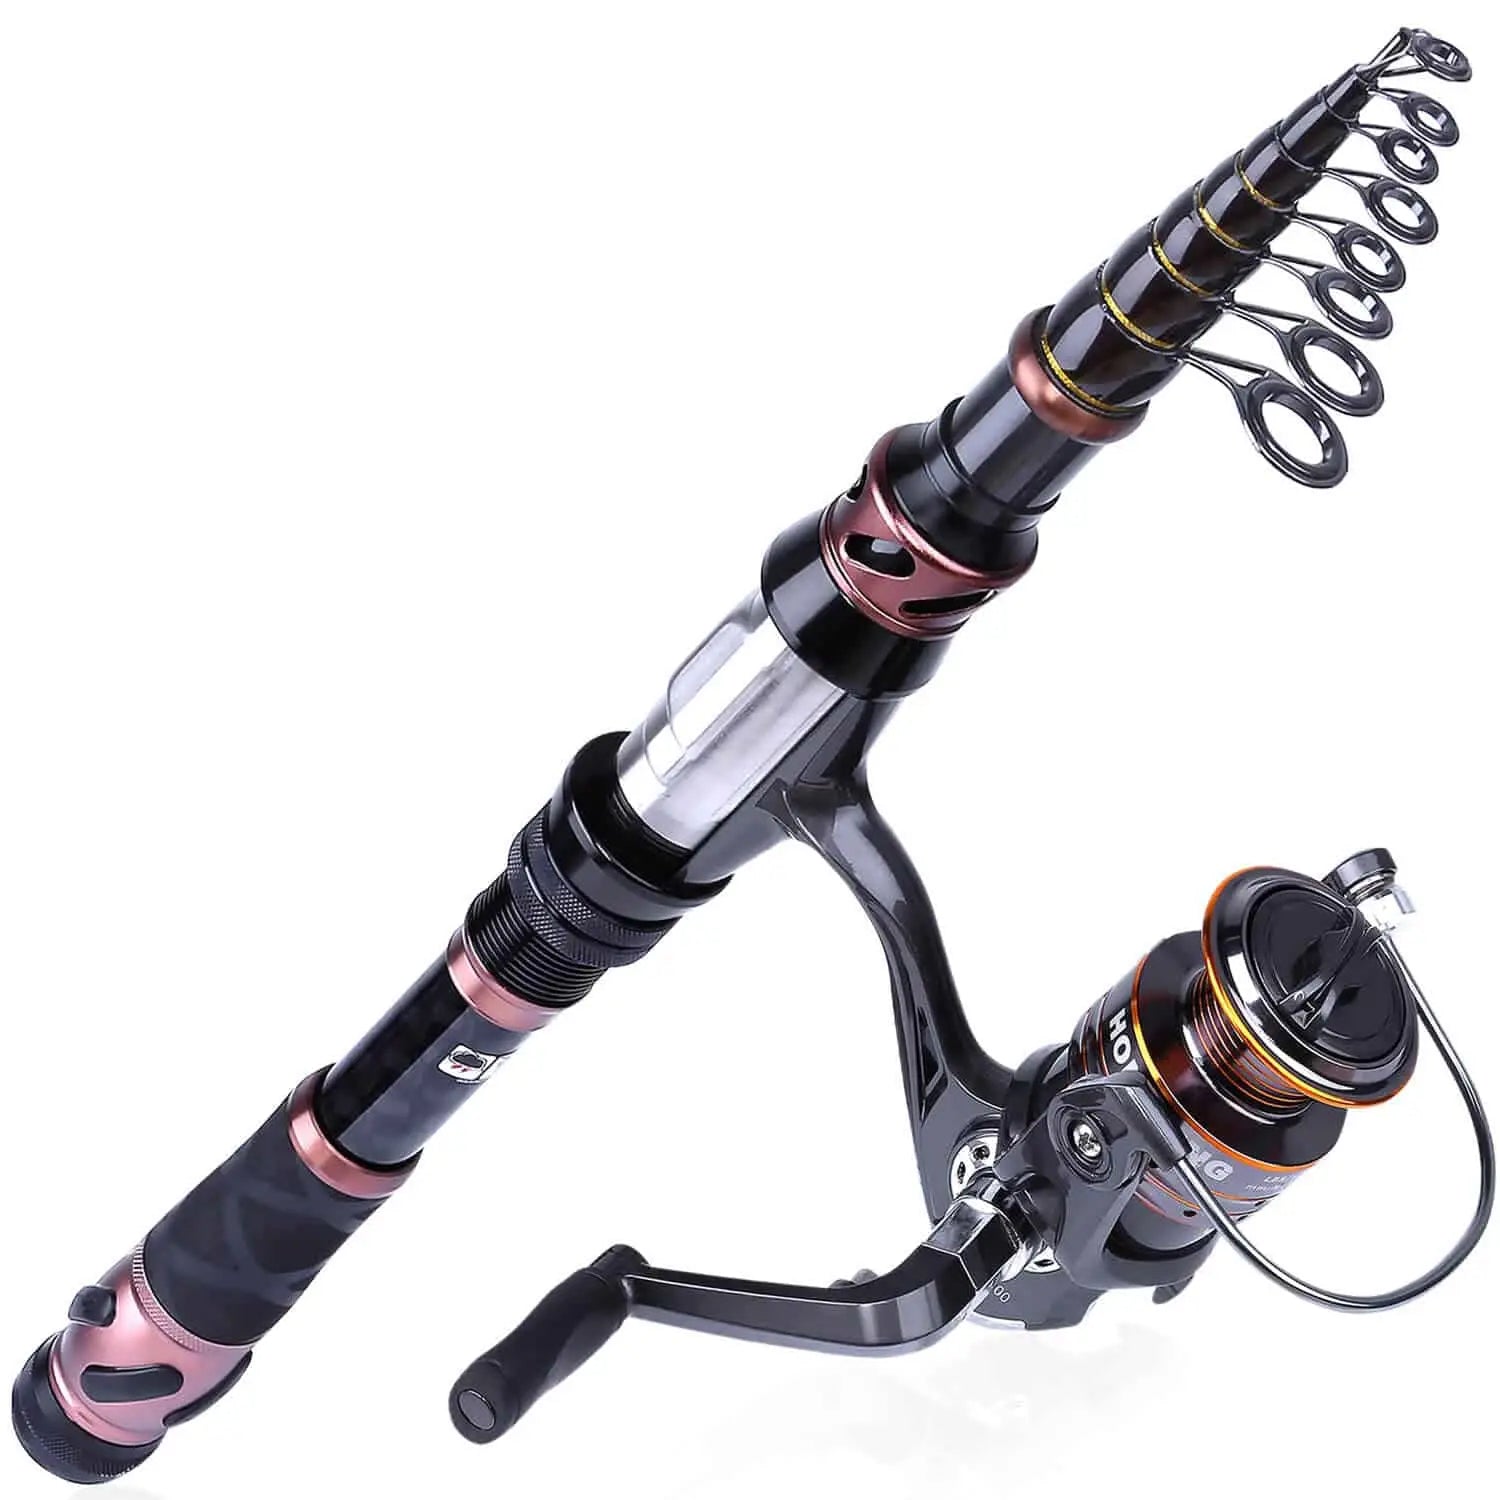 PLUSINNO Eagle Hunting V Spinning Telescopic Fishing Rods and Reel Combos